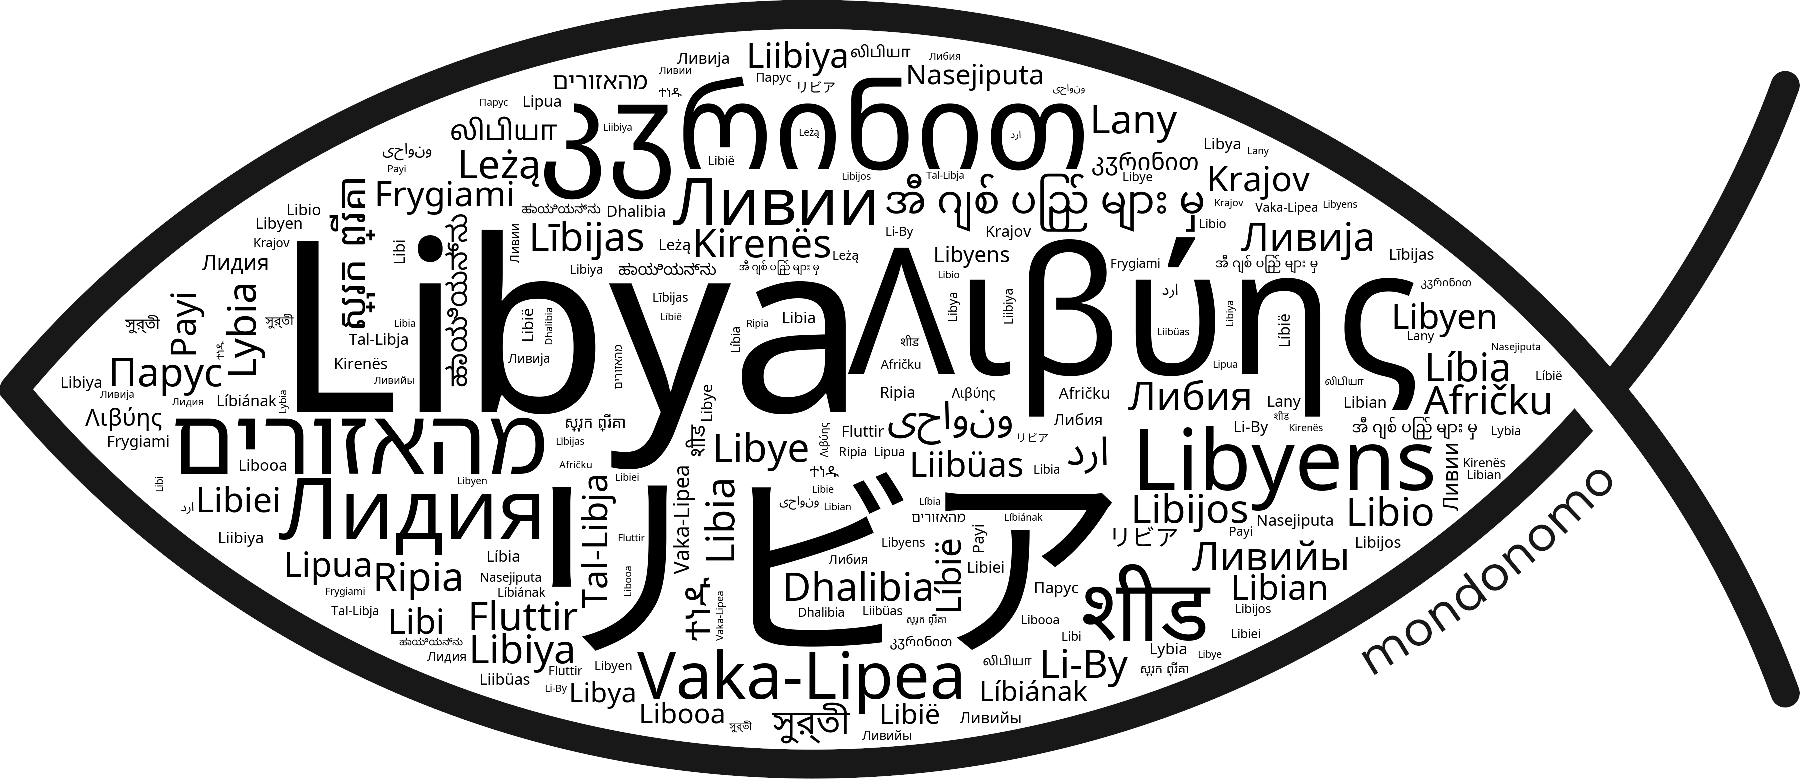 Name Libya in the world's Bibles